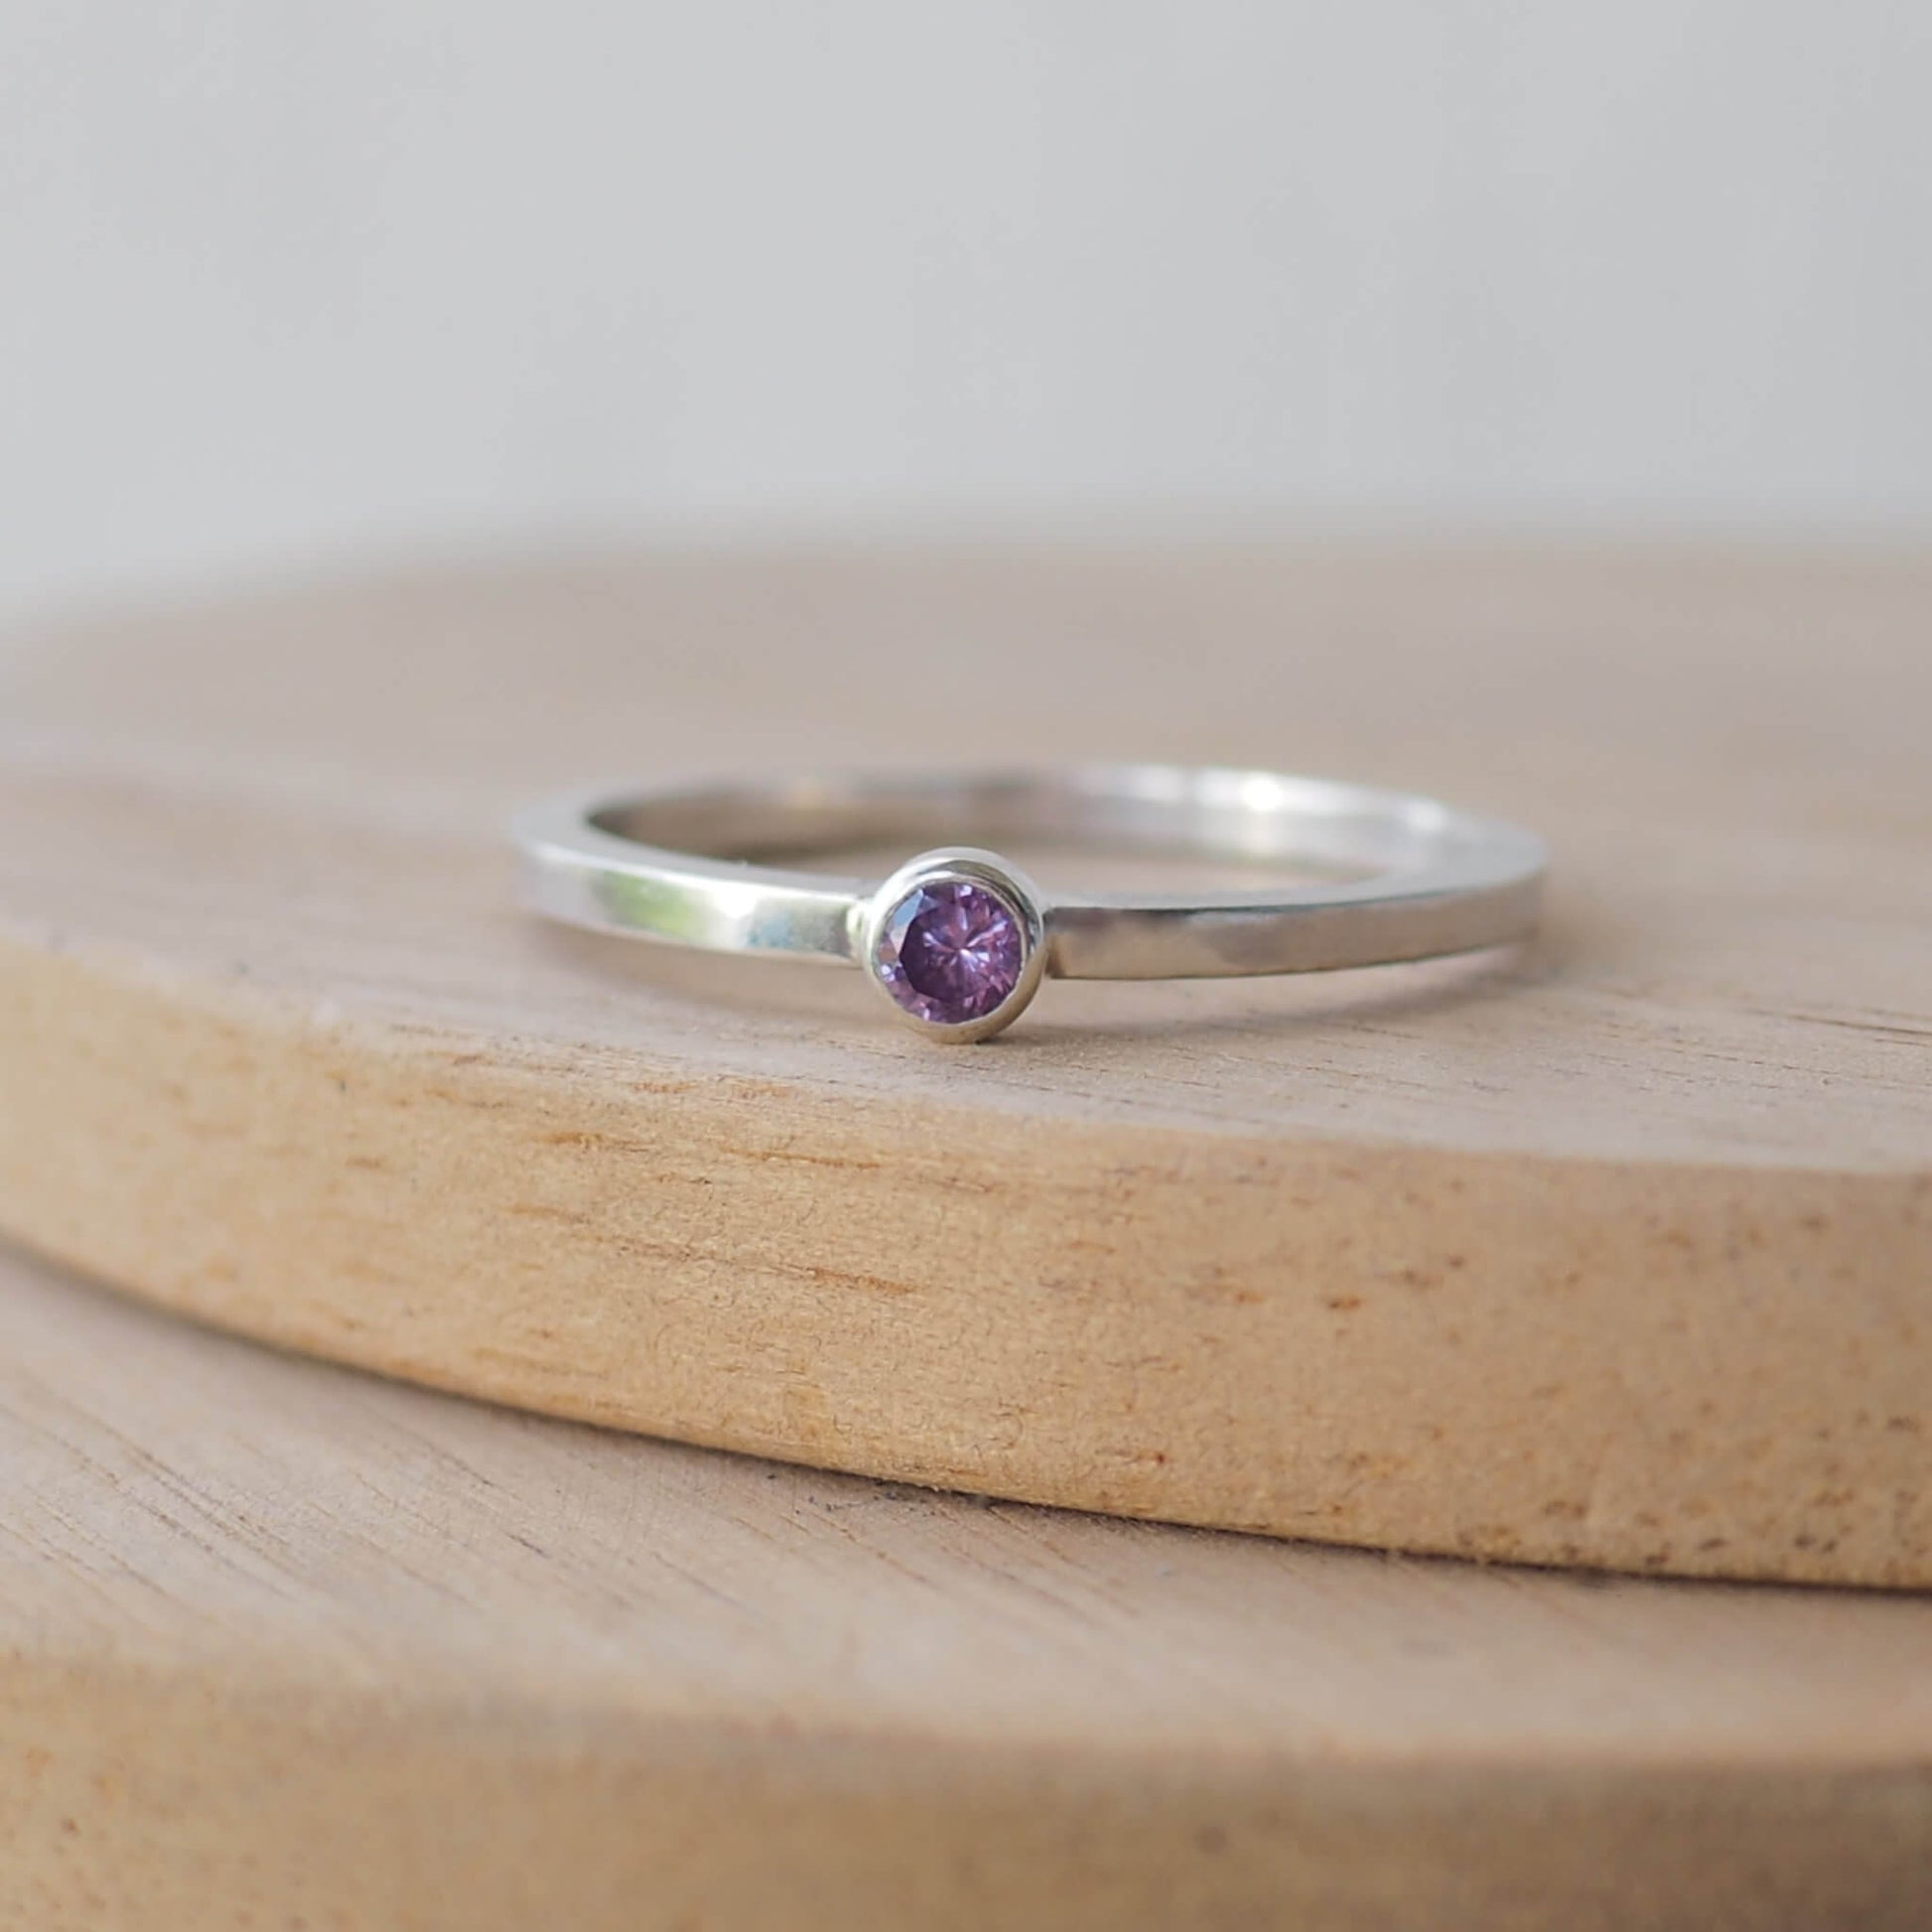 Silver ring with a purple gemstone. The ring is simple in style with no embellishment , with a square wire band 1.5mm thick with a simple purple 3mm round cubic zirconia stone set in an enclosed silver setting. Amethyst is birthstone for February. The ring is Sterling Silver and made to your ring size. Handmade in Scotland by Maram Jewellery